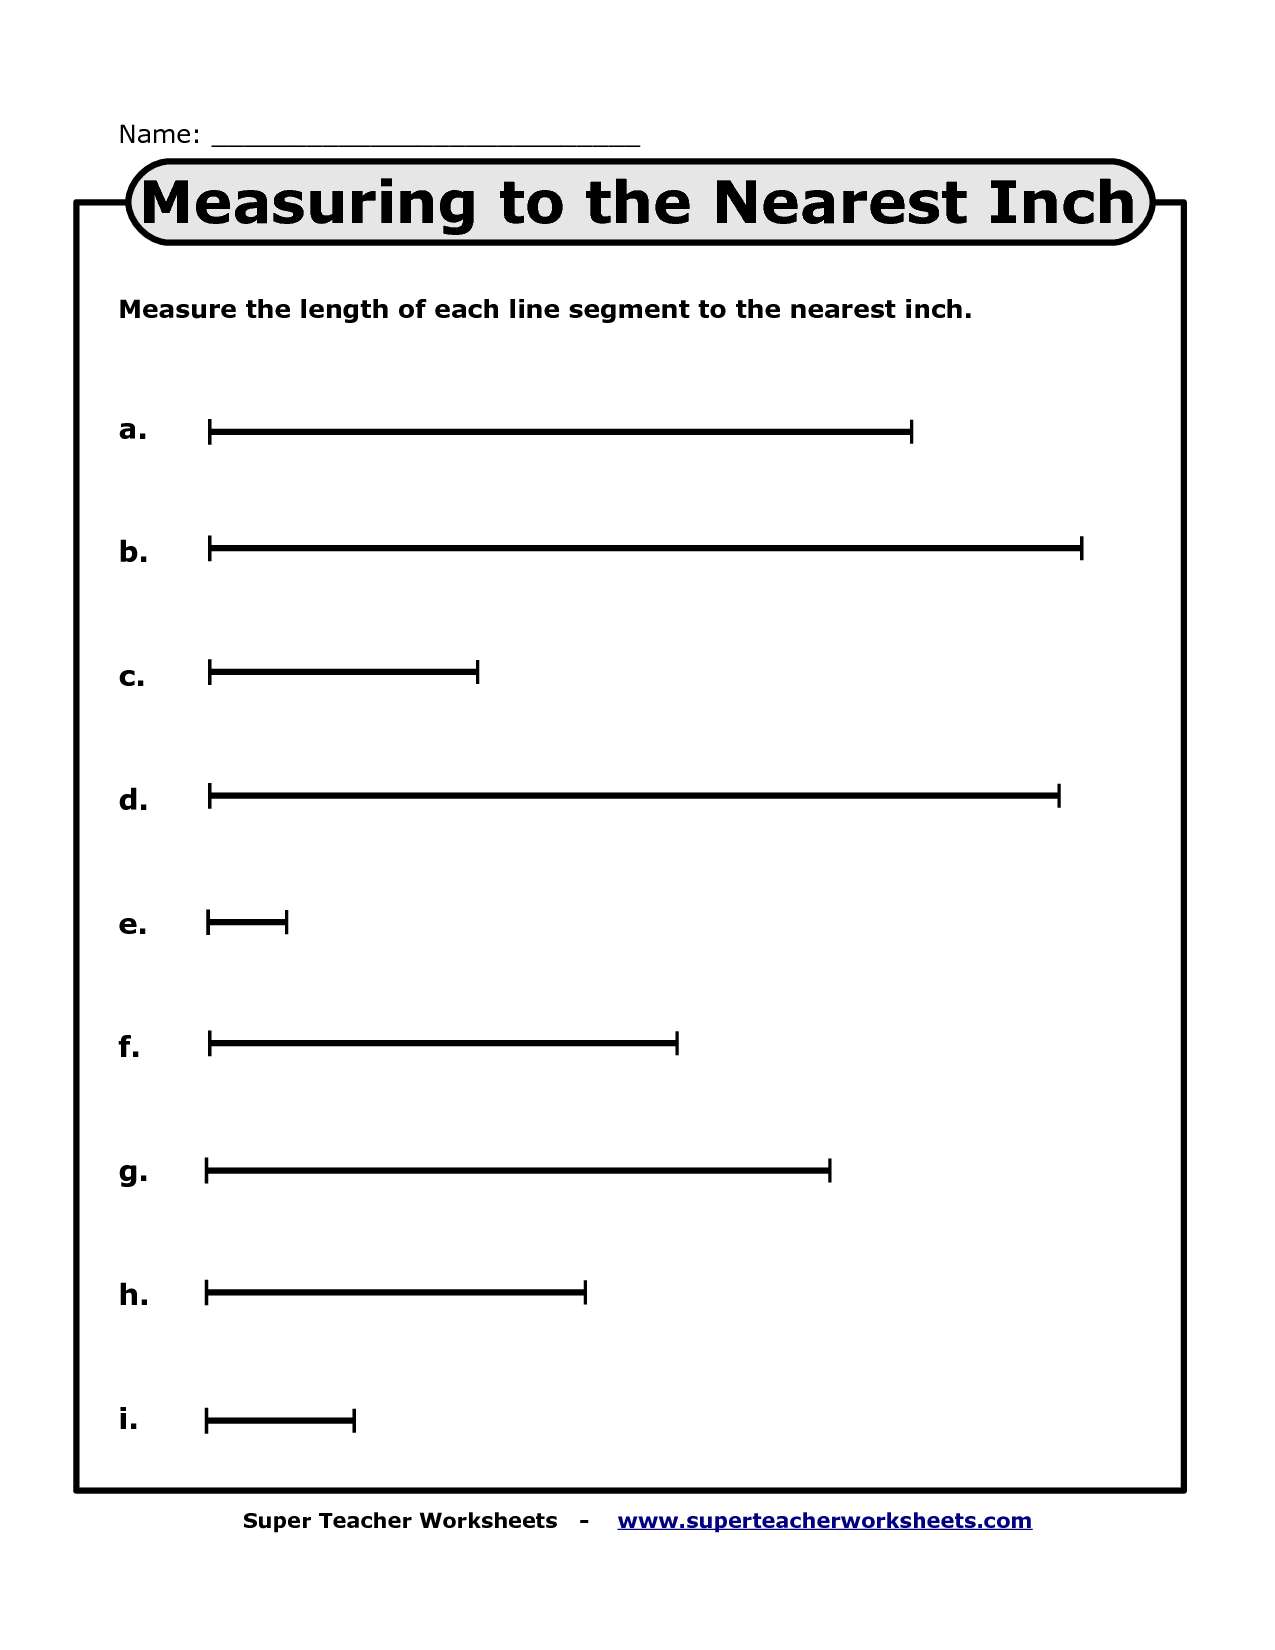 Measuring Inches Worksheets Image